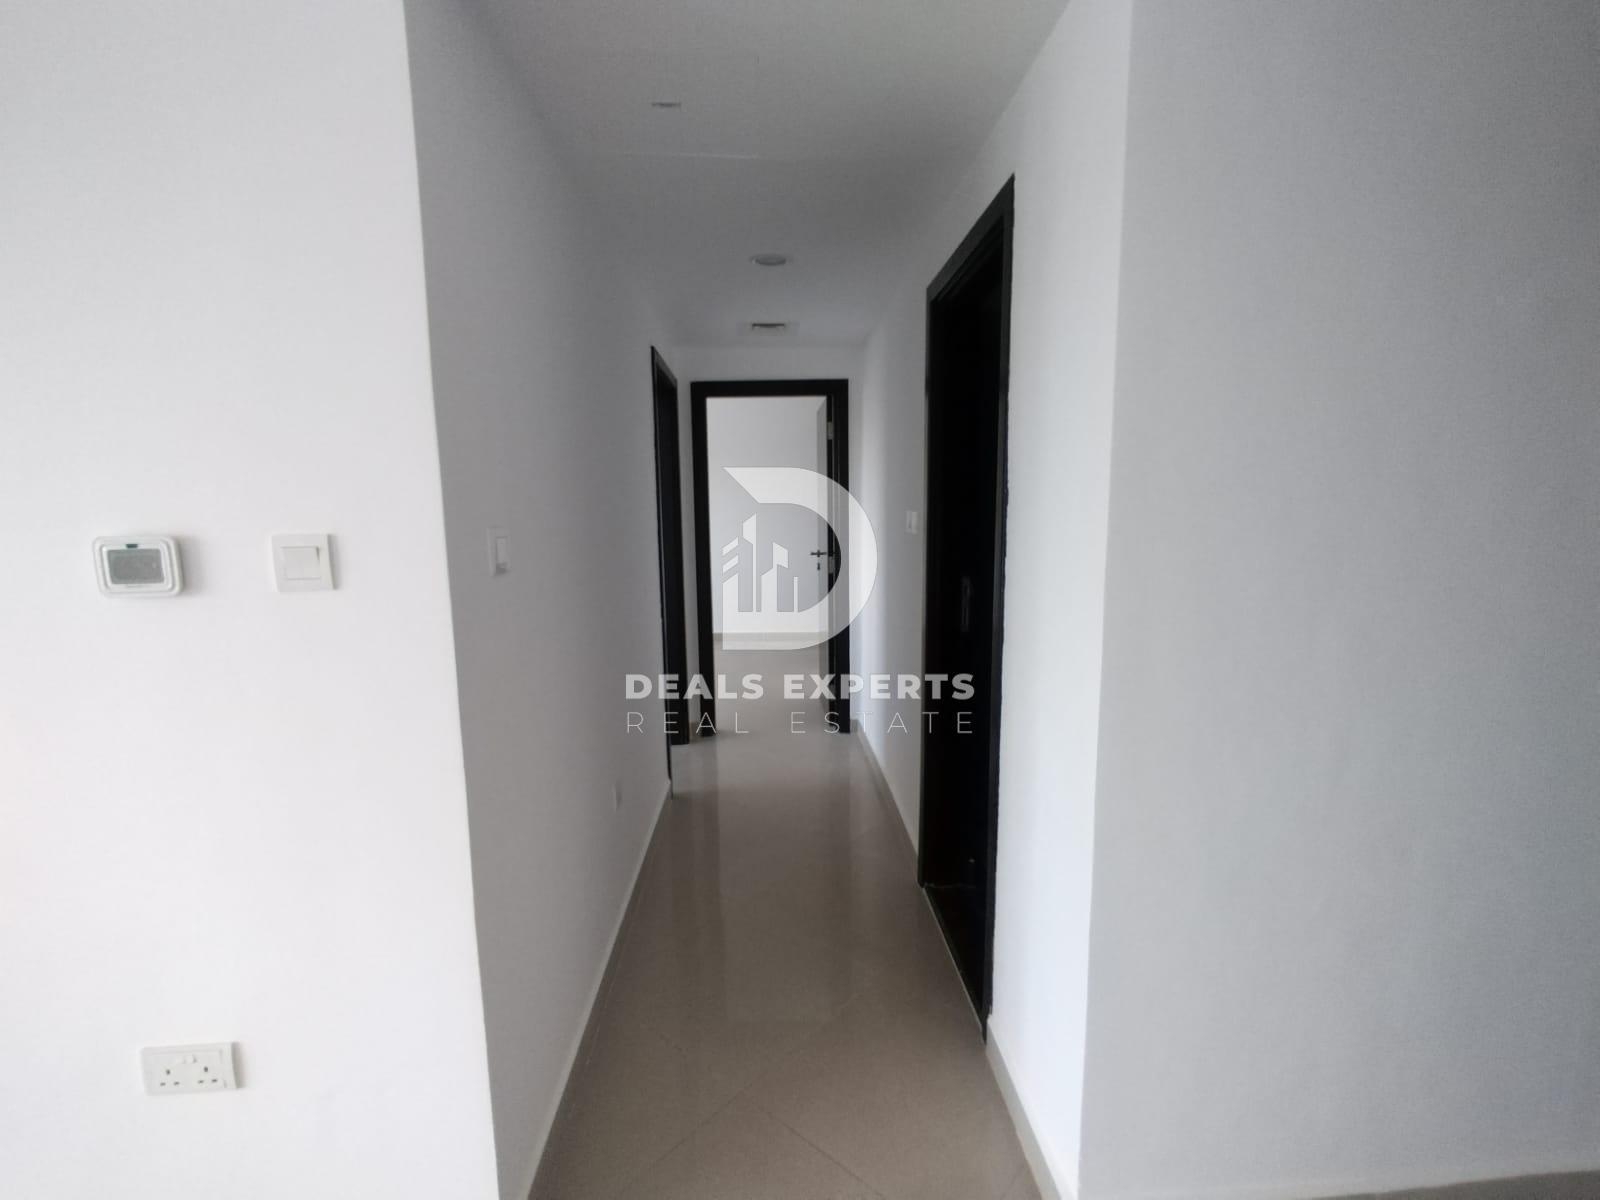 1 bed, 2 bath Apartment for sale in Tower 21, Al Reef Downtown, Al Reef, Abu Dhabi for price AED 600000 